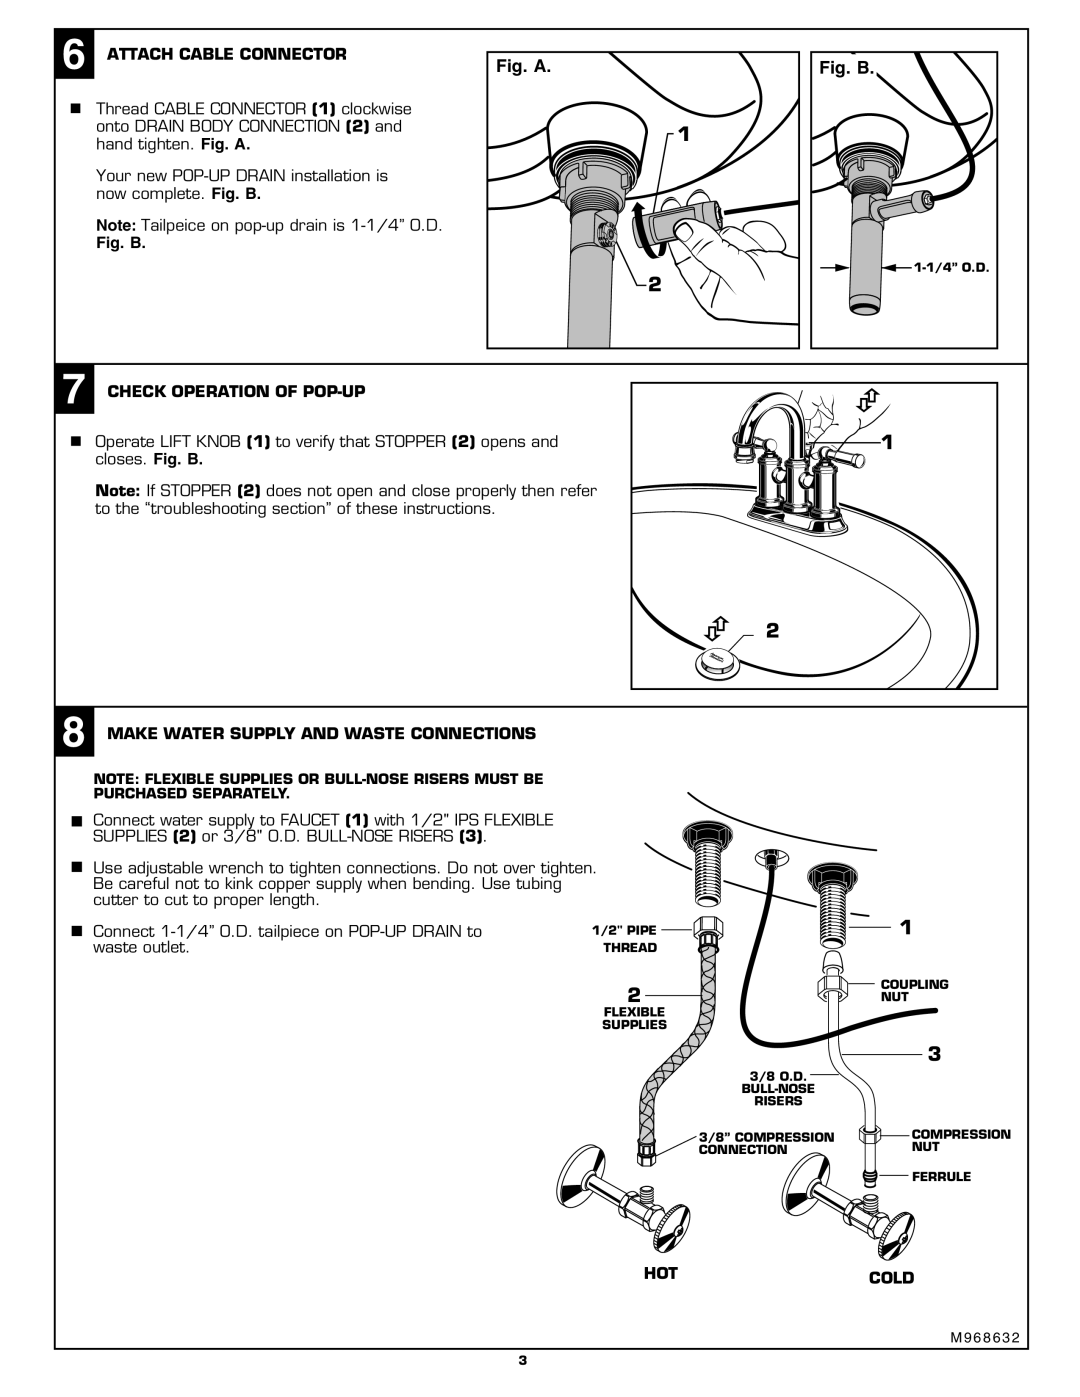 American Standard 6054.XXX Fig. A, Attach Cable Connector, Check Operation Of Pop-Up, closes. Fig. B, Hotcold 